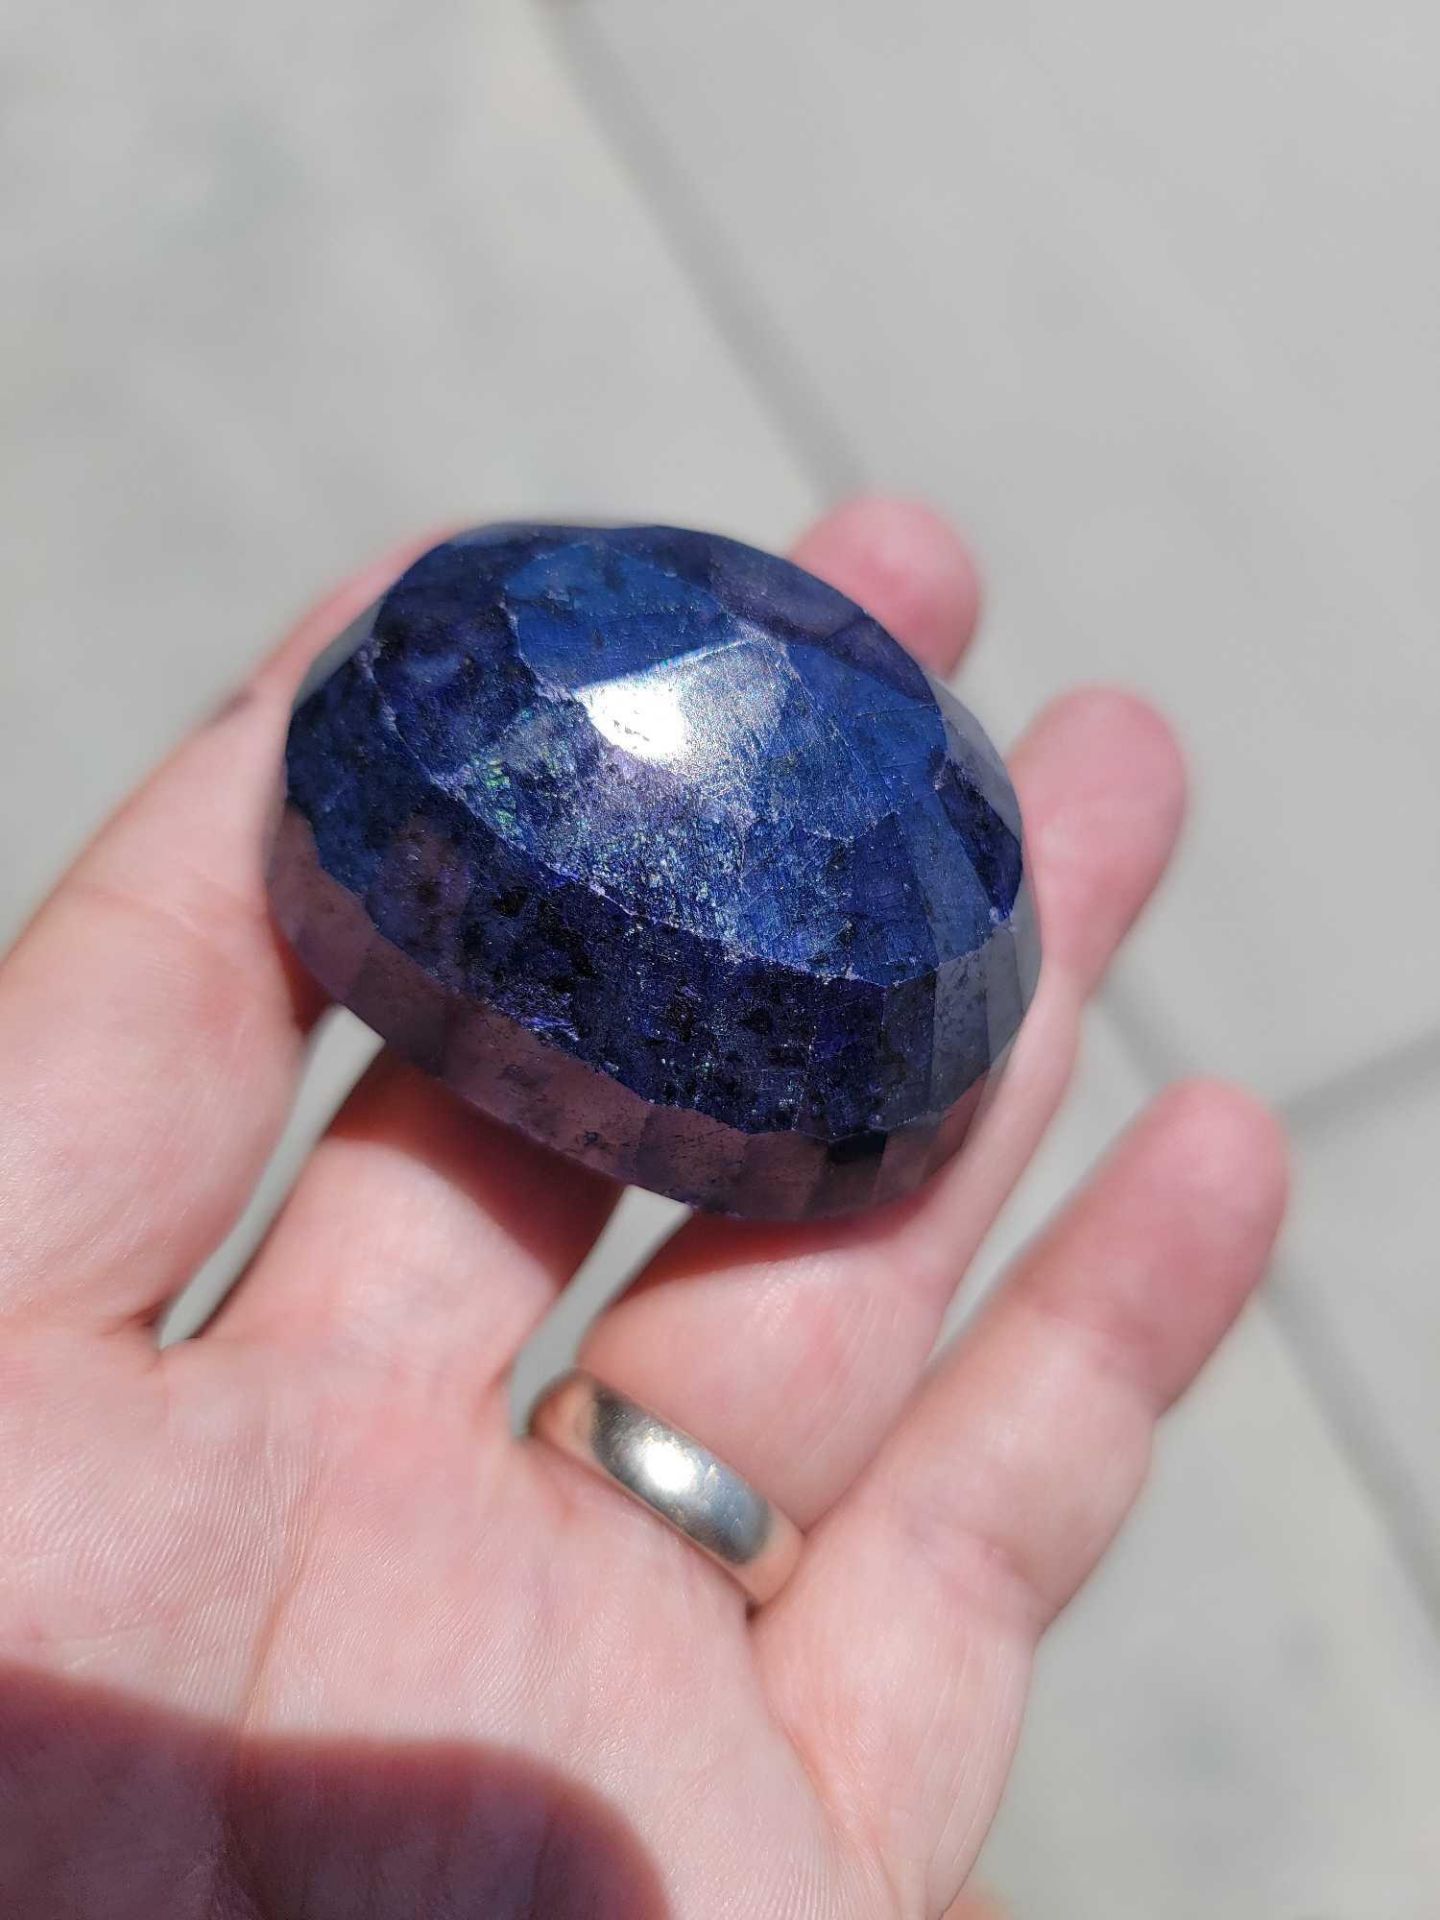 699 Ct Natural blue sapphire - Image 4 of 10